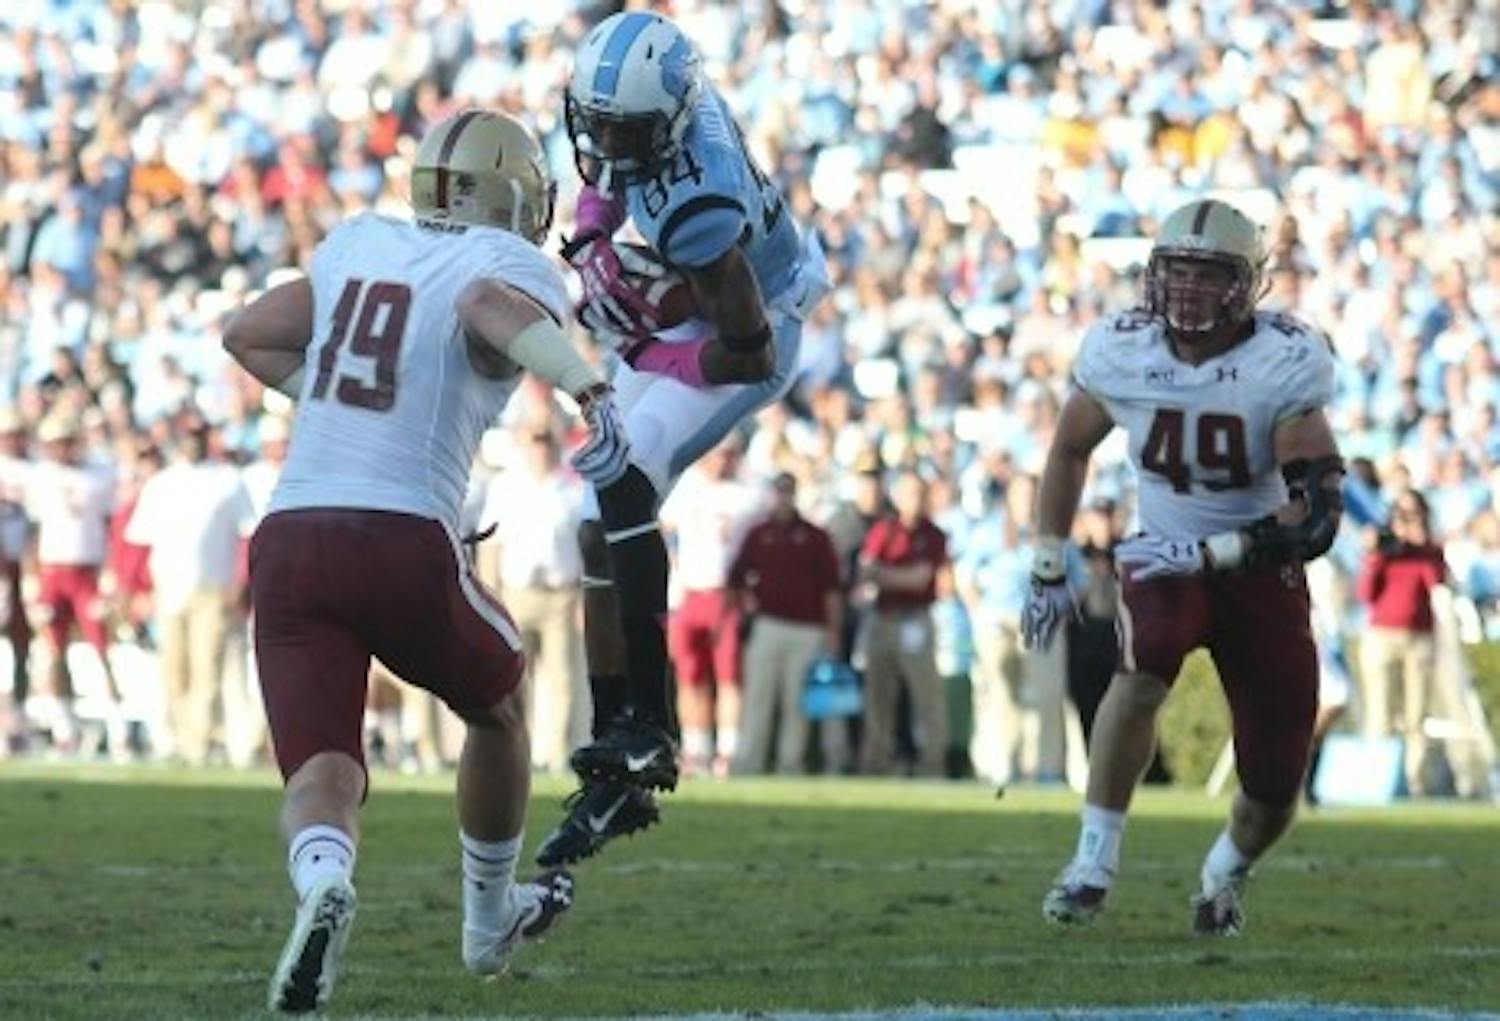 UNC wide receiver Bug Howard (84) catches a pass for a touchdown in a game against Boston College. Howard finished the 2014 football season with 42 catches and 455 yards with 2 touchdowns.